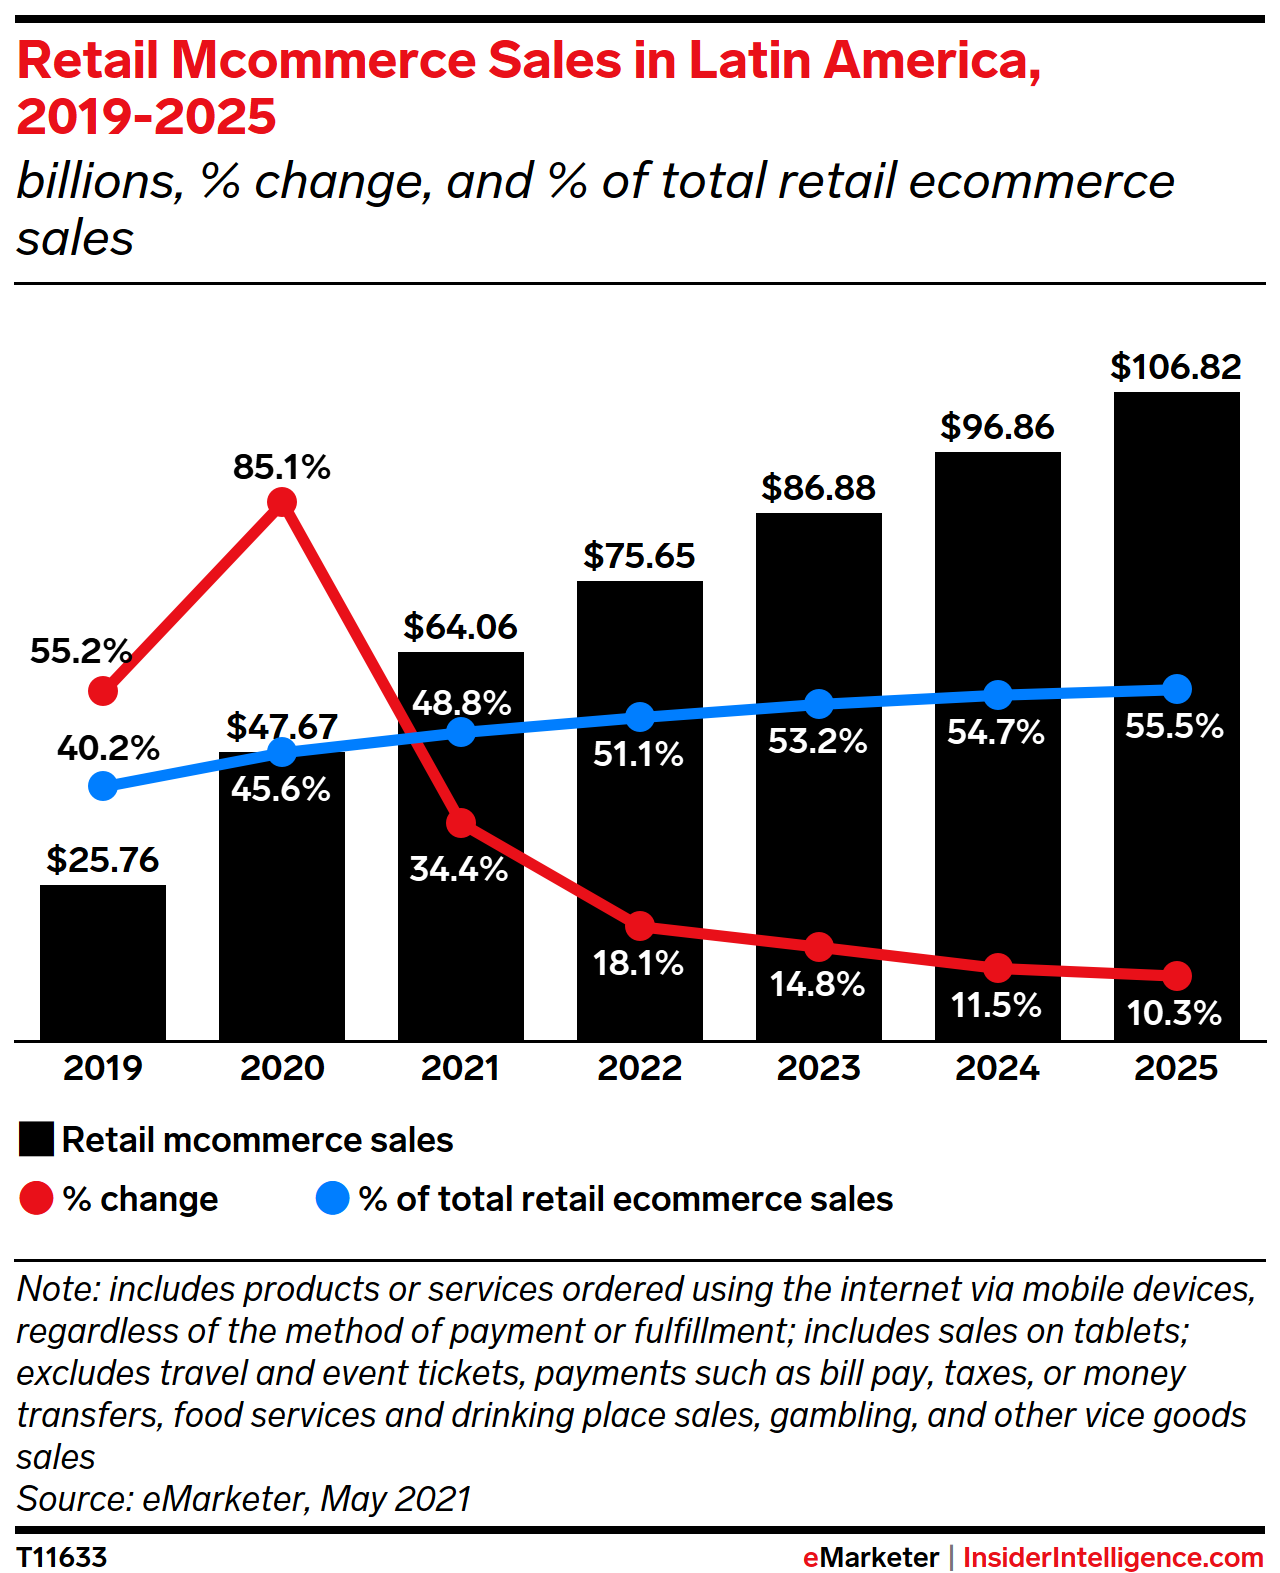 Retail Mcommerce Sales in Latin America, 2019-2025 (billions, % change, and % of retail ecommerce sales)